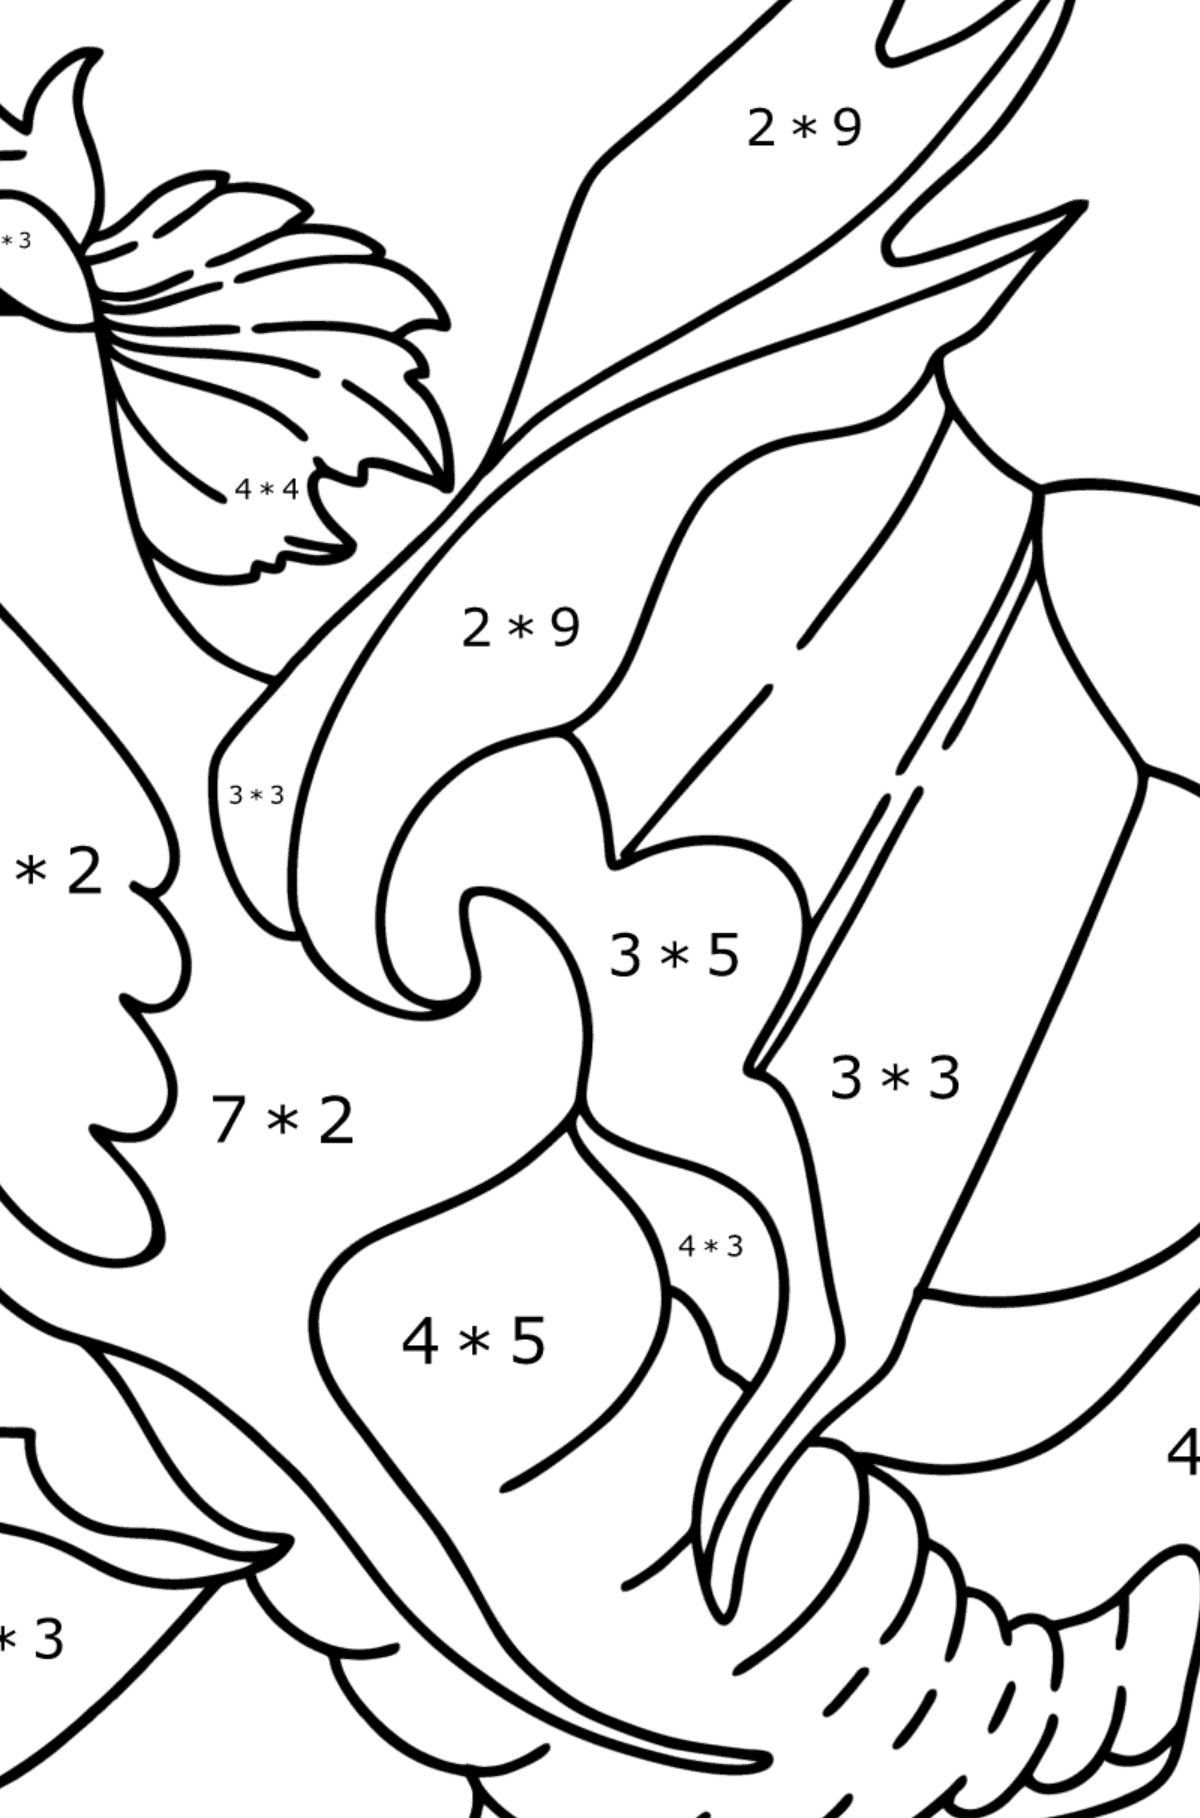 Lucky Dragon coloring page - Math Coloring - Multiplication for Kids